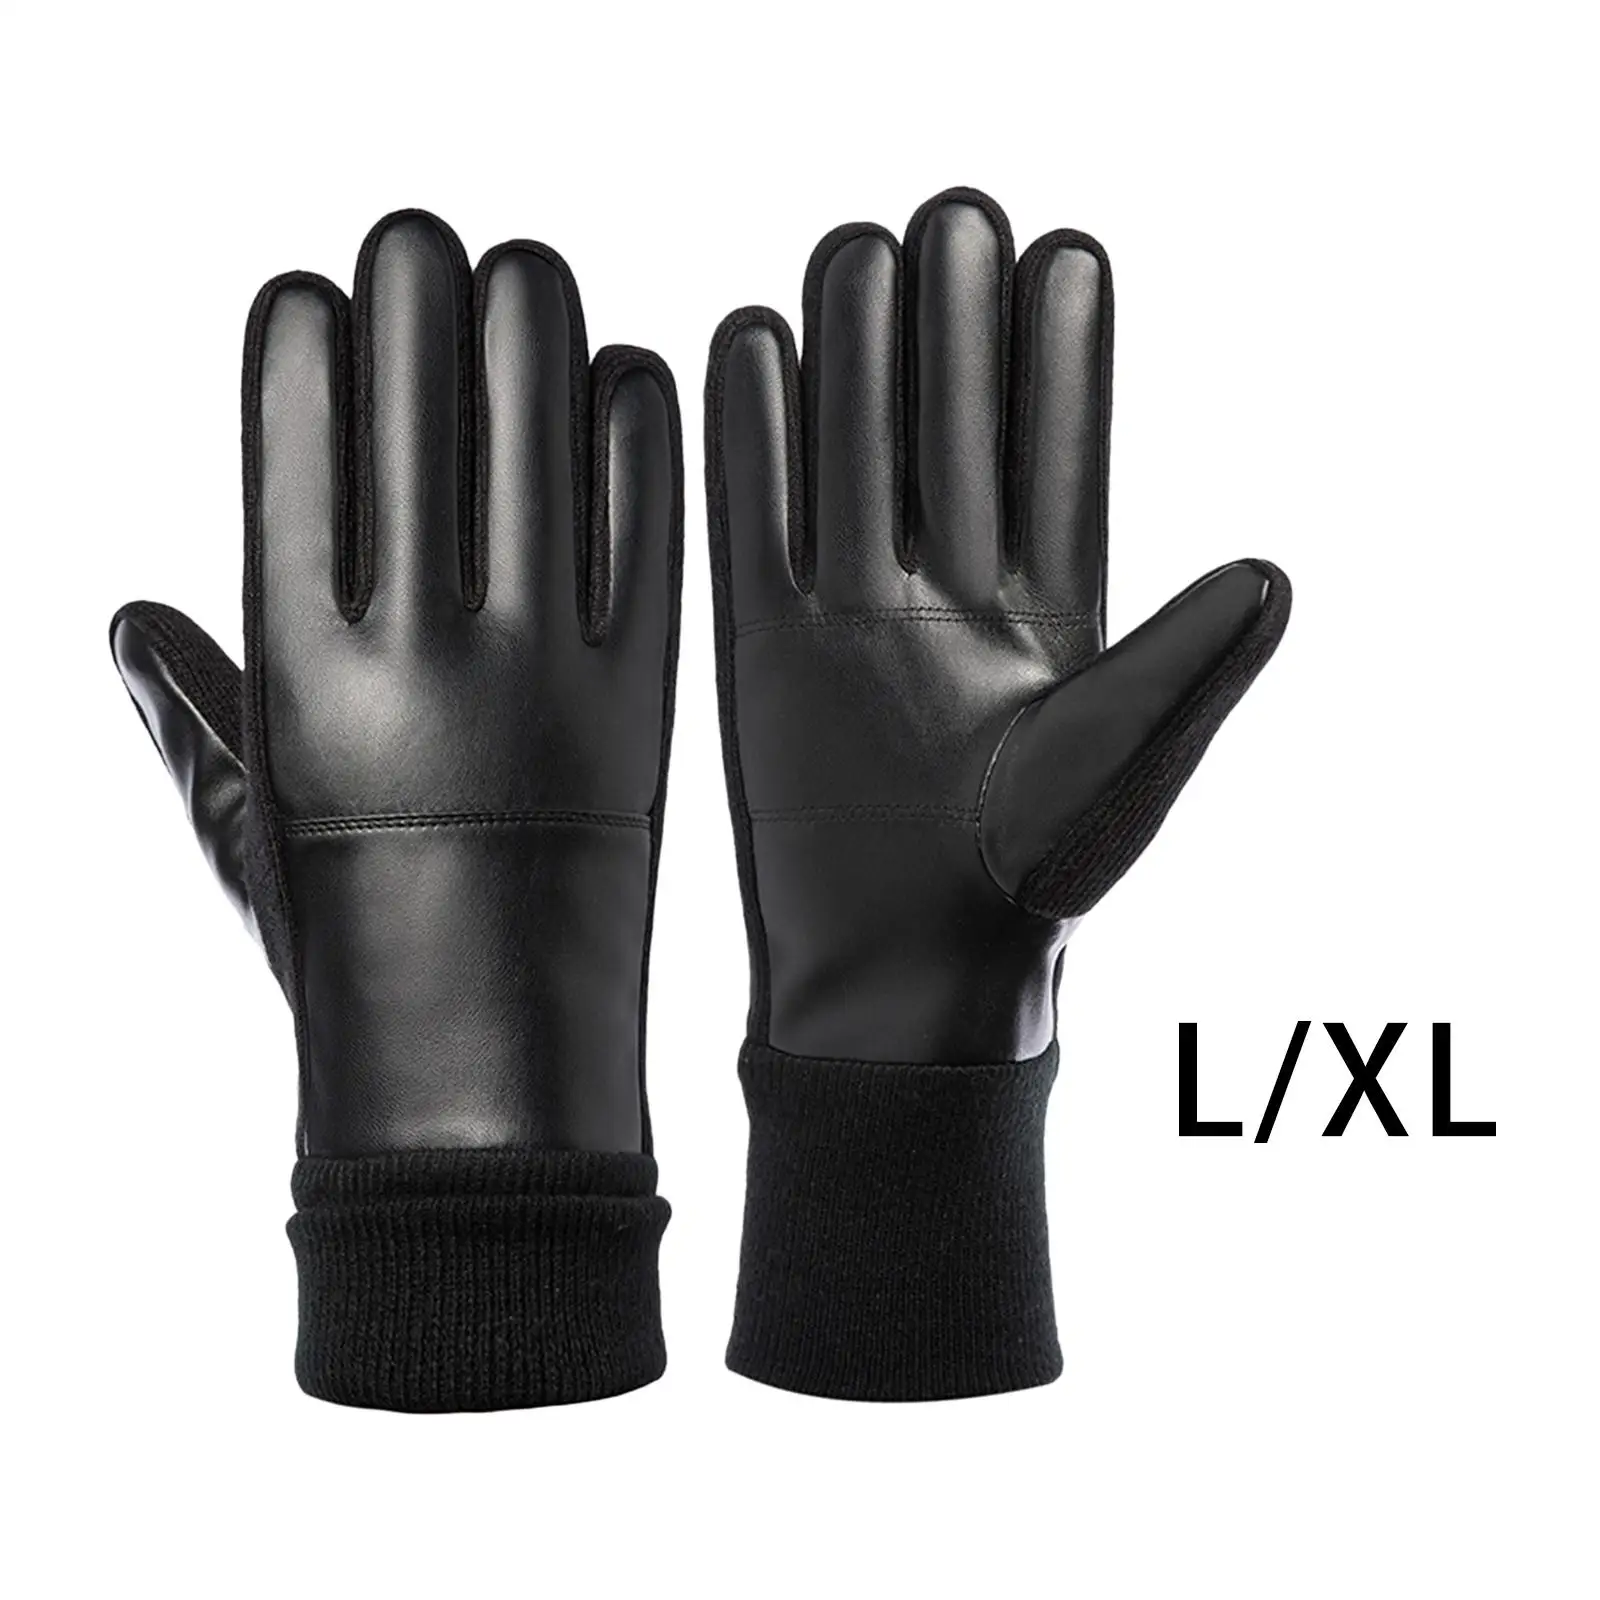 Thermal Men Gloves Anti-Slip Full Finger Waterproof Warm Windproof for Bicycle Snowboarding Ski Riding Driving